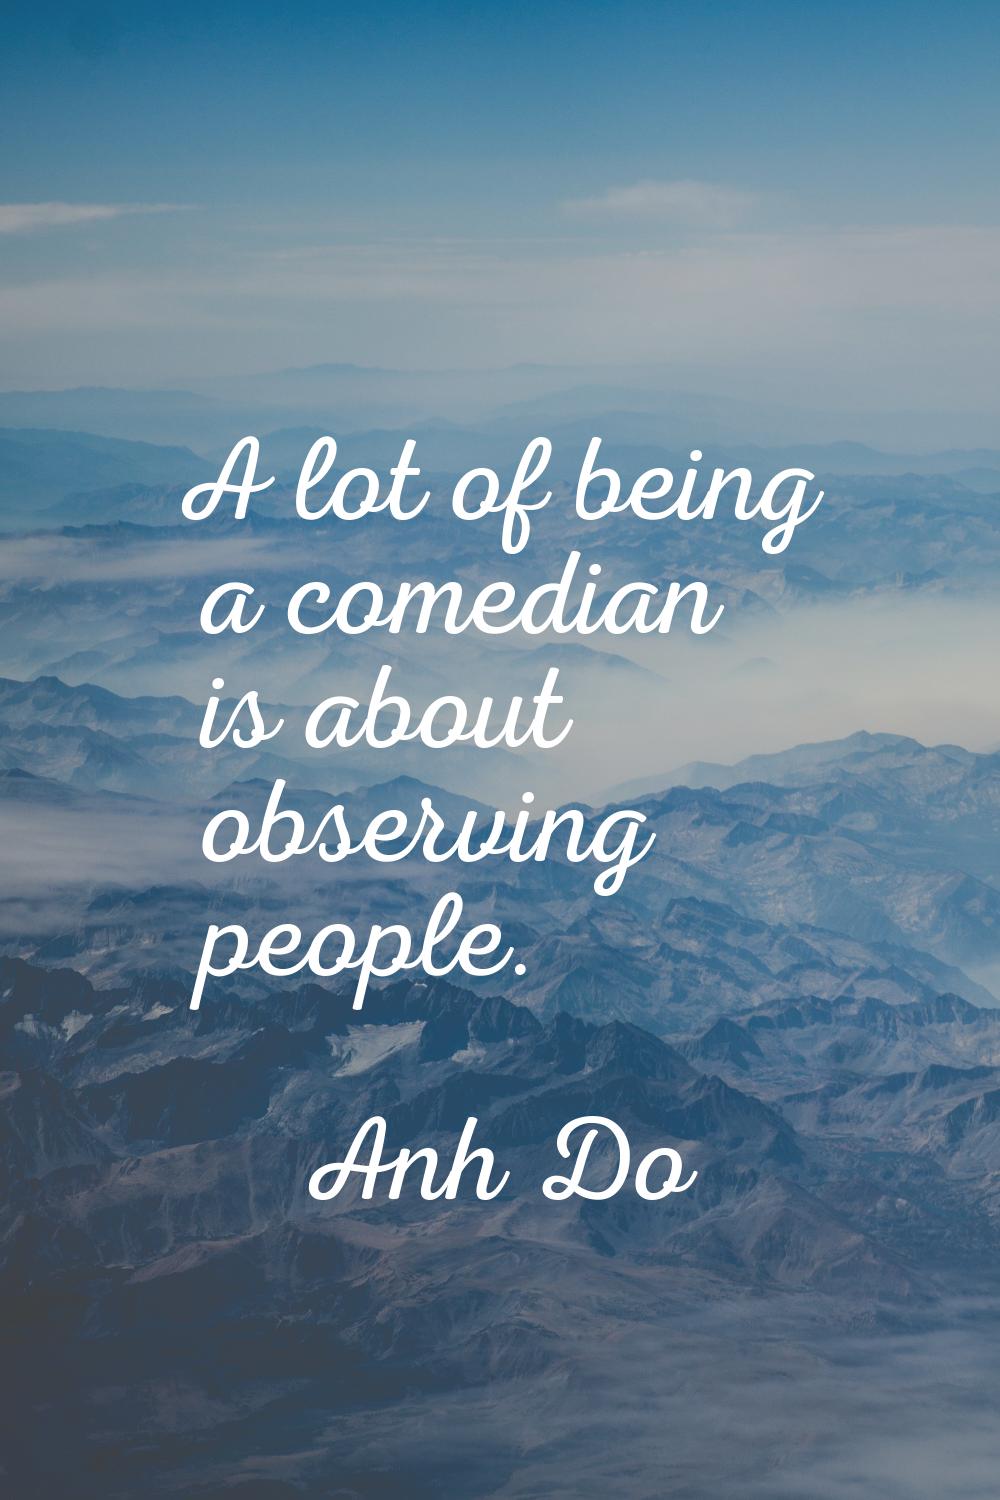 A lot of being a comedian is about observing people.